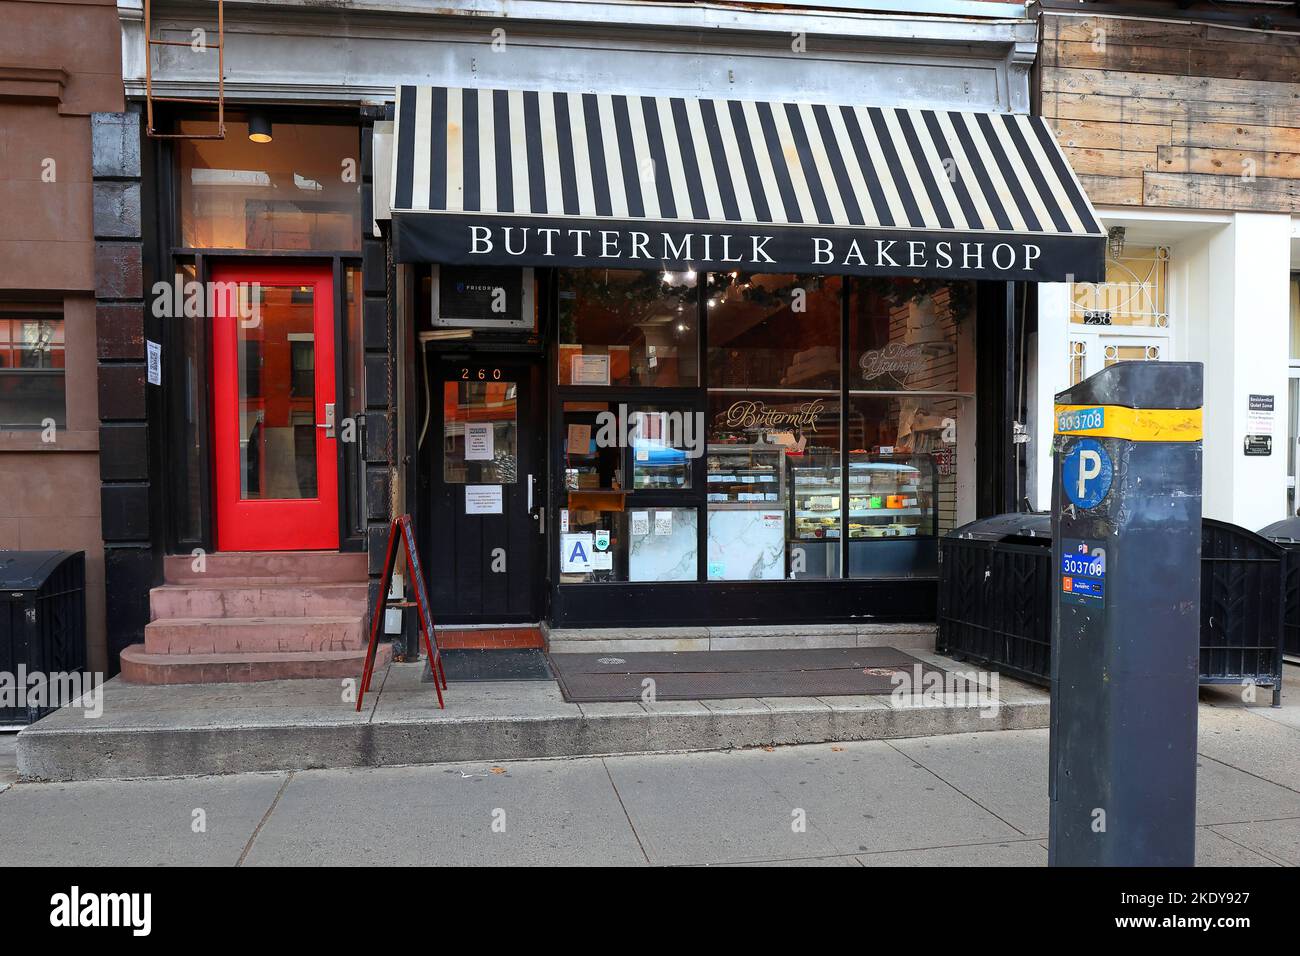 Buttermilk Bakeshop, 260 5th Ave, Brooklyn, New York, NYC storefront photo of a cake bakery in Park Slope. Stock Photo